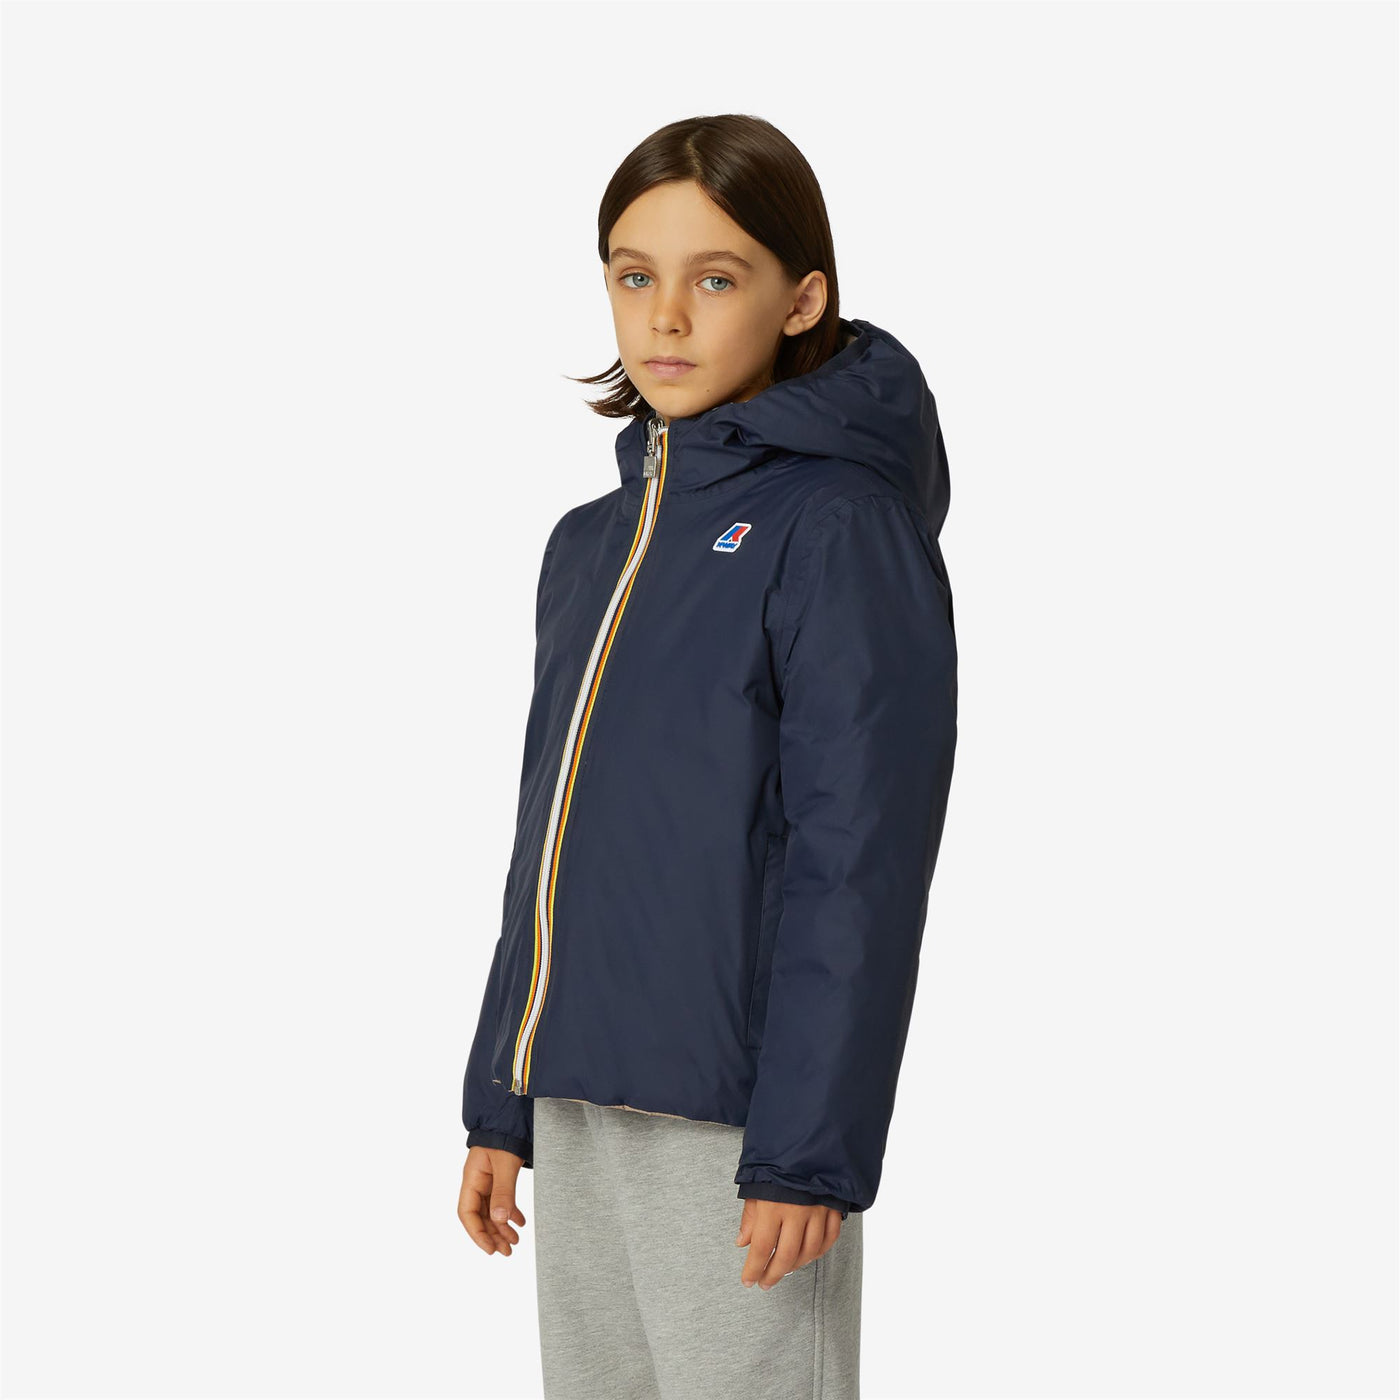 Jackets Boy P. JACQUES THERMO PLUS.2 REVERSIBLE Short BLUE DEPTH - BEIGE TAUPE | kway Detail (jpg Rgb)			